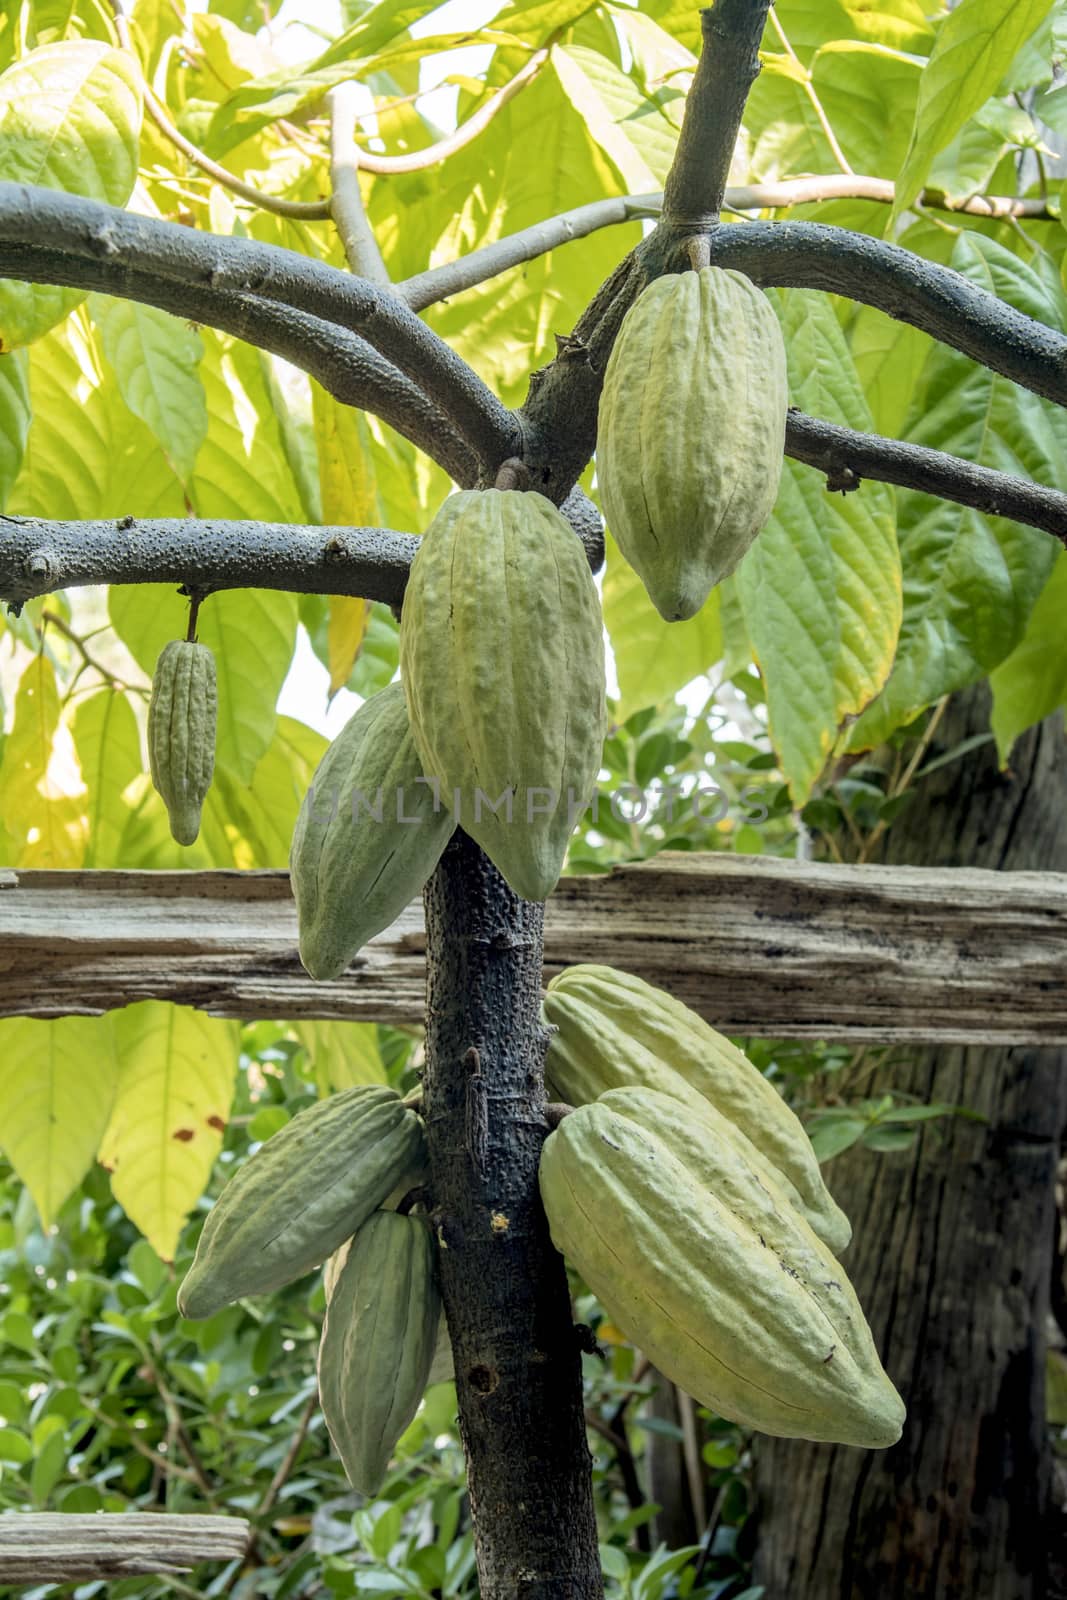 The cocoa tree with fruits. Yellow and green Cocoa pods grow on  by Aedka_Stodio